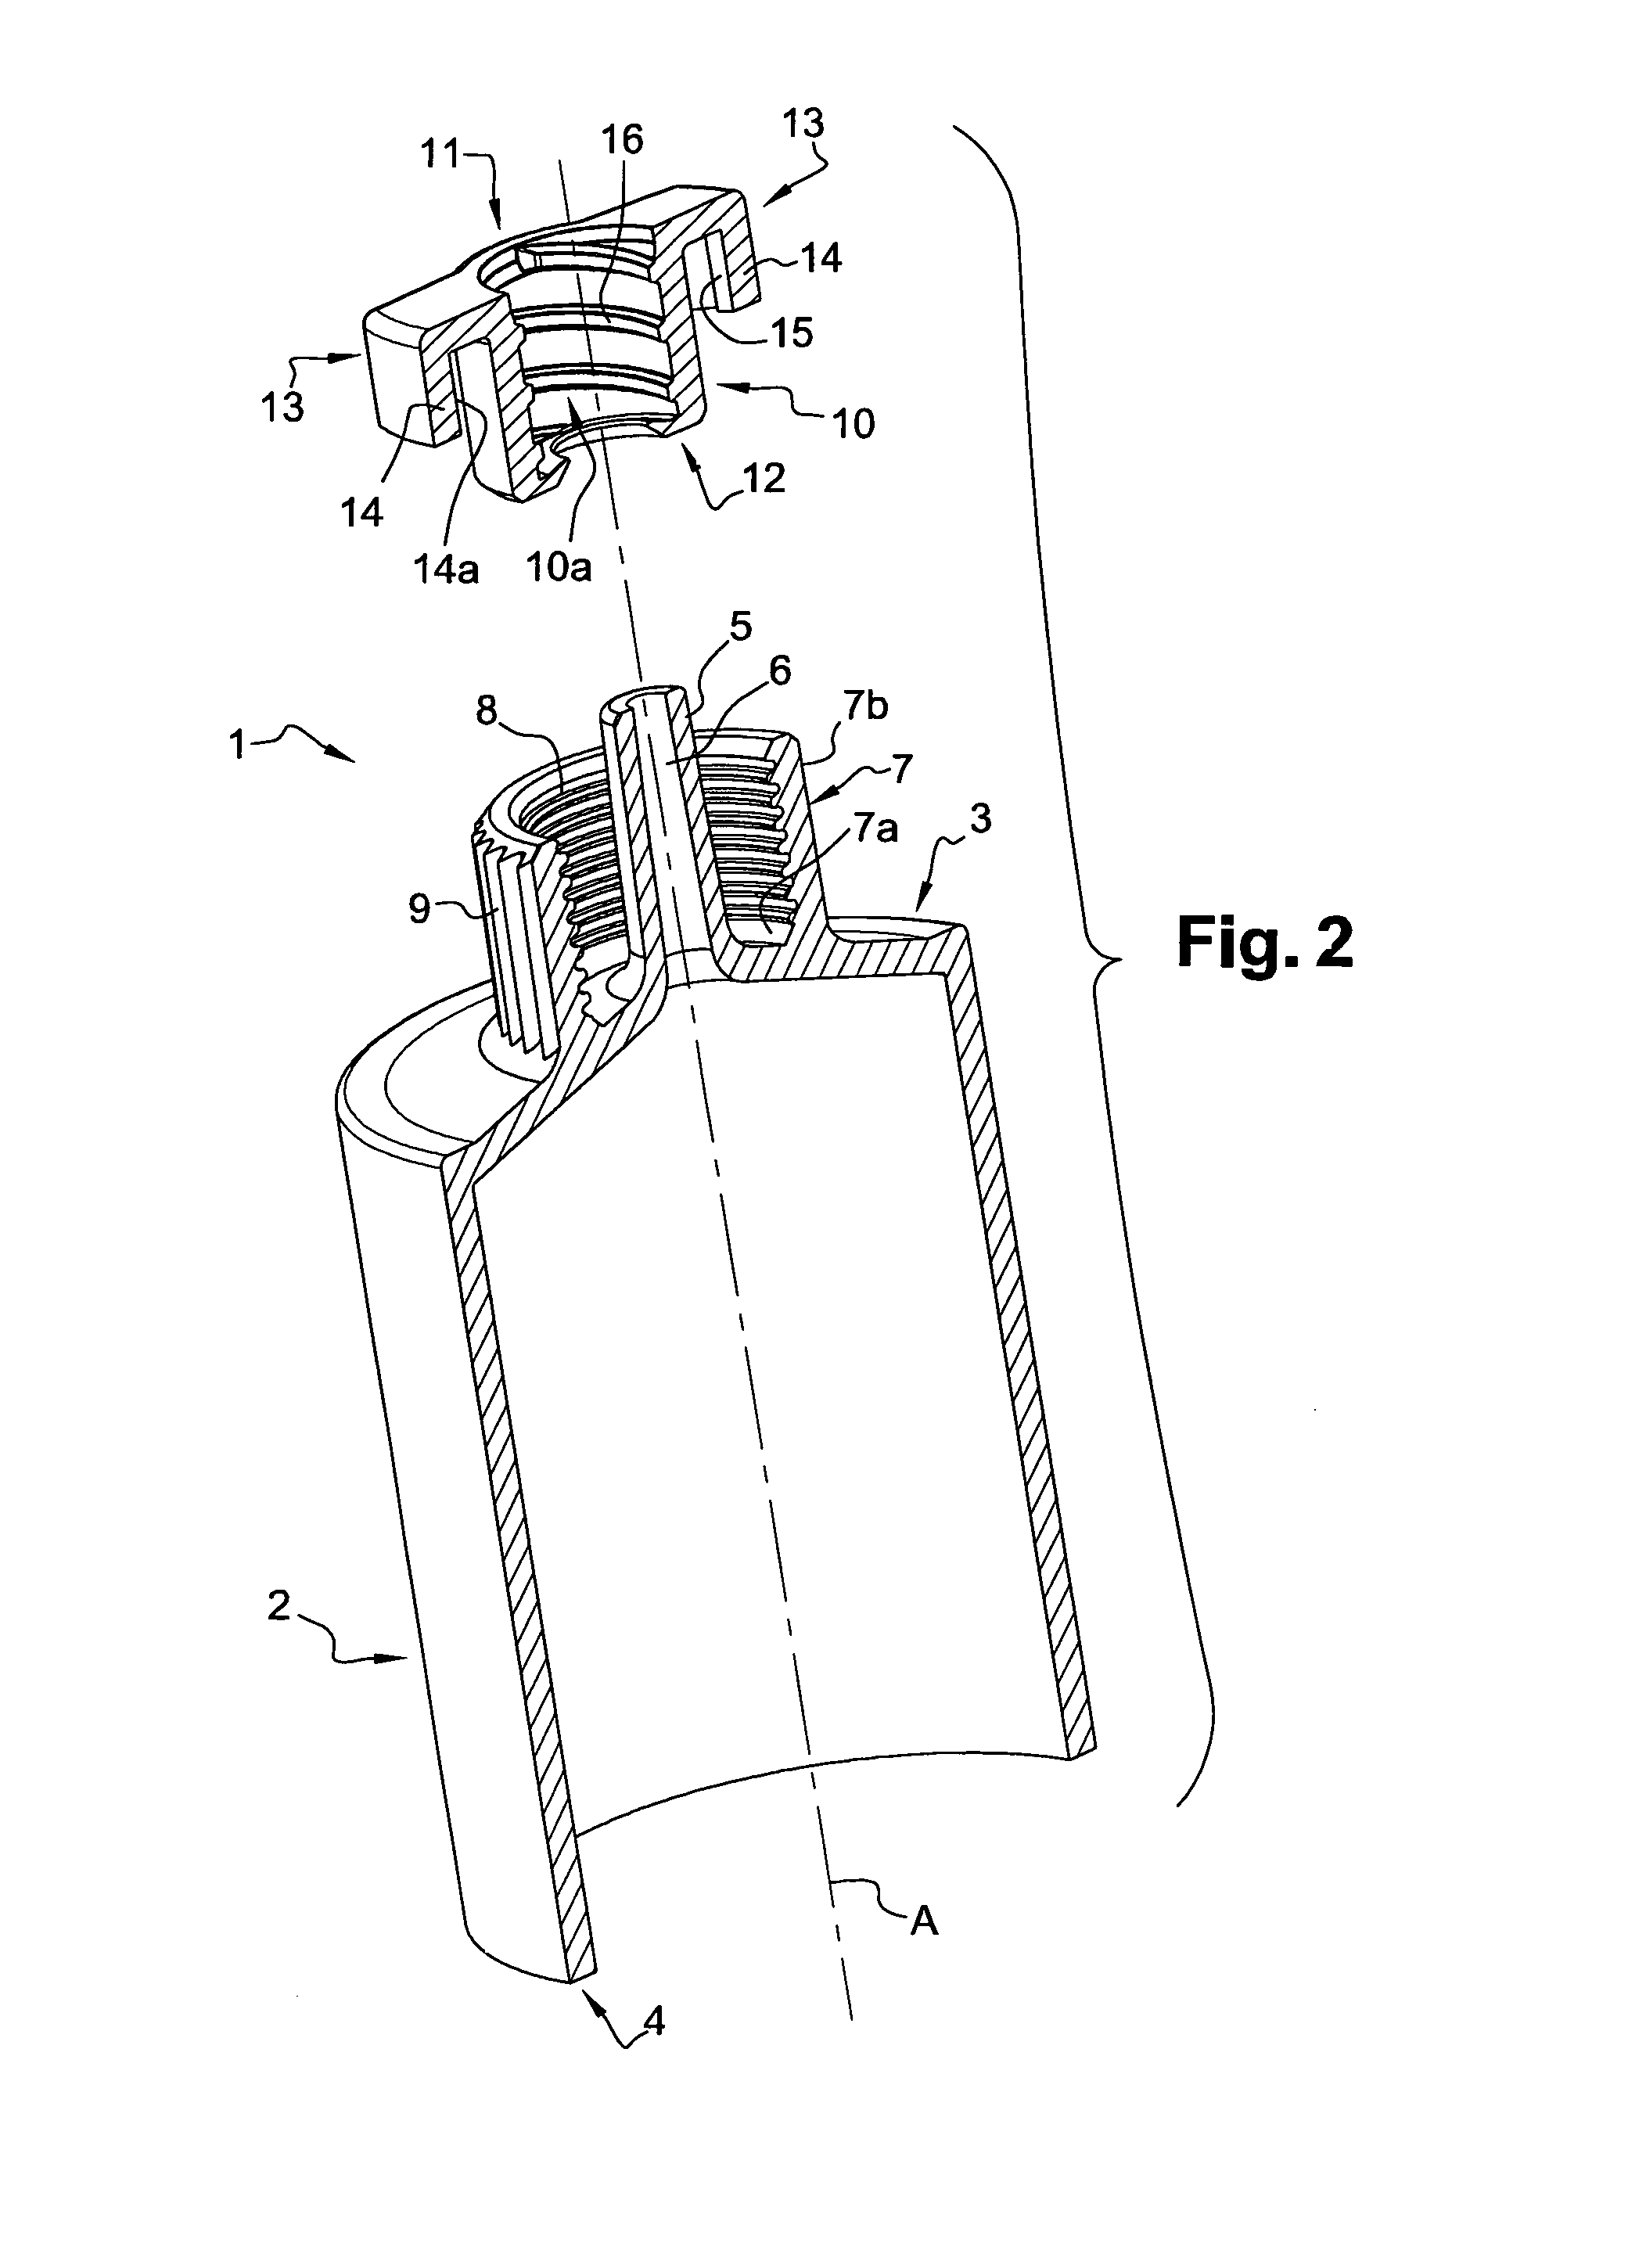 Drug delivery device with safe connection means